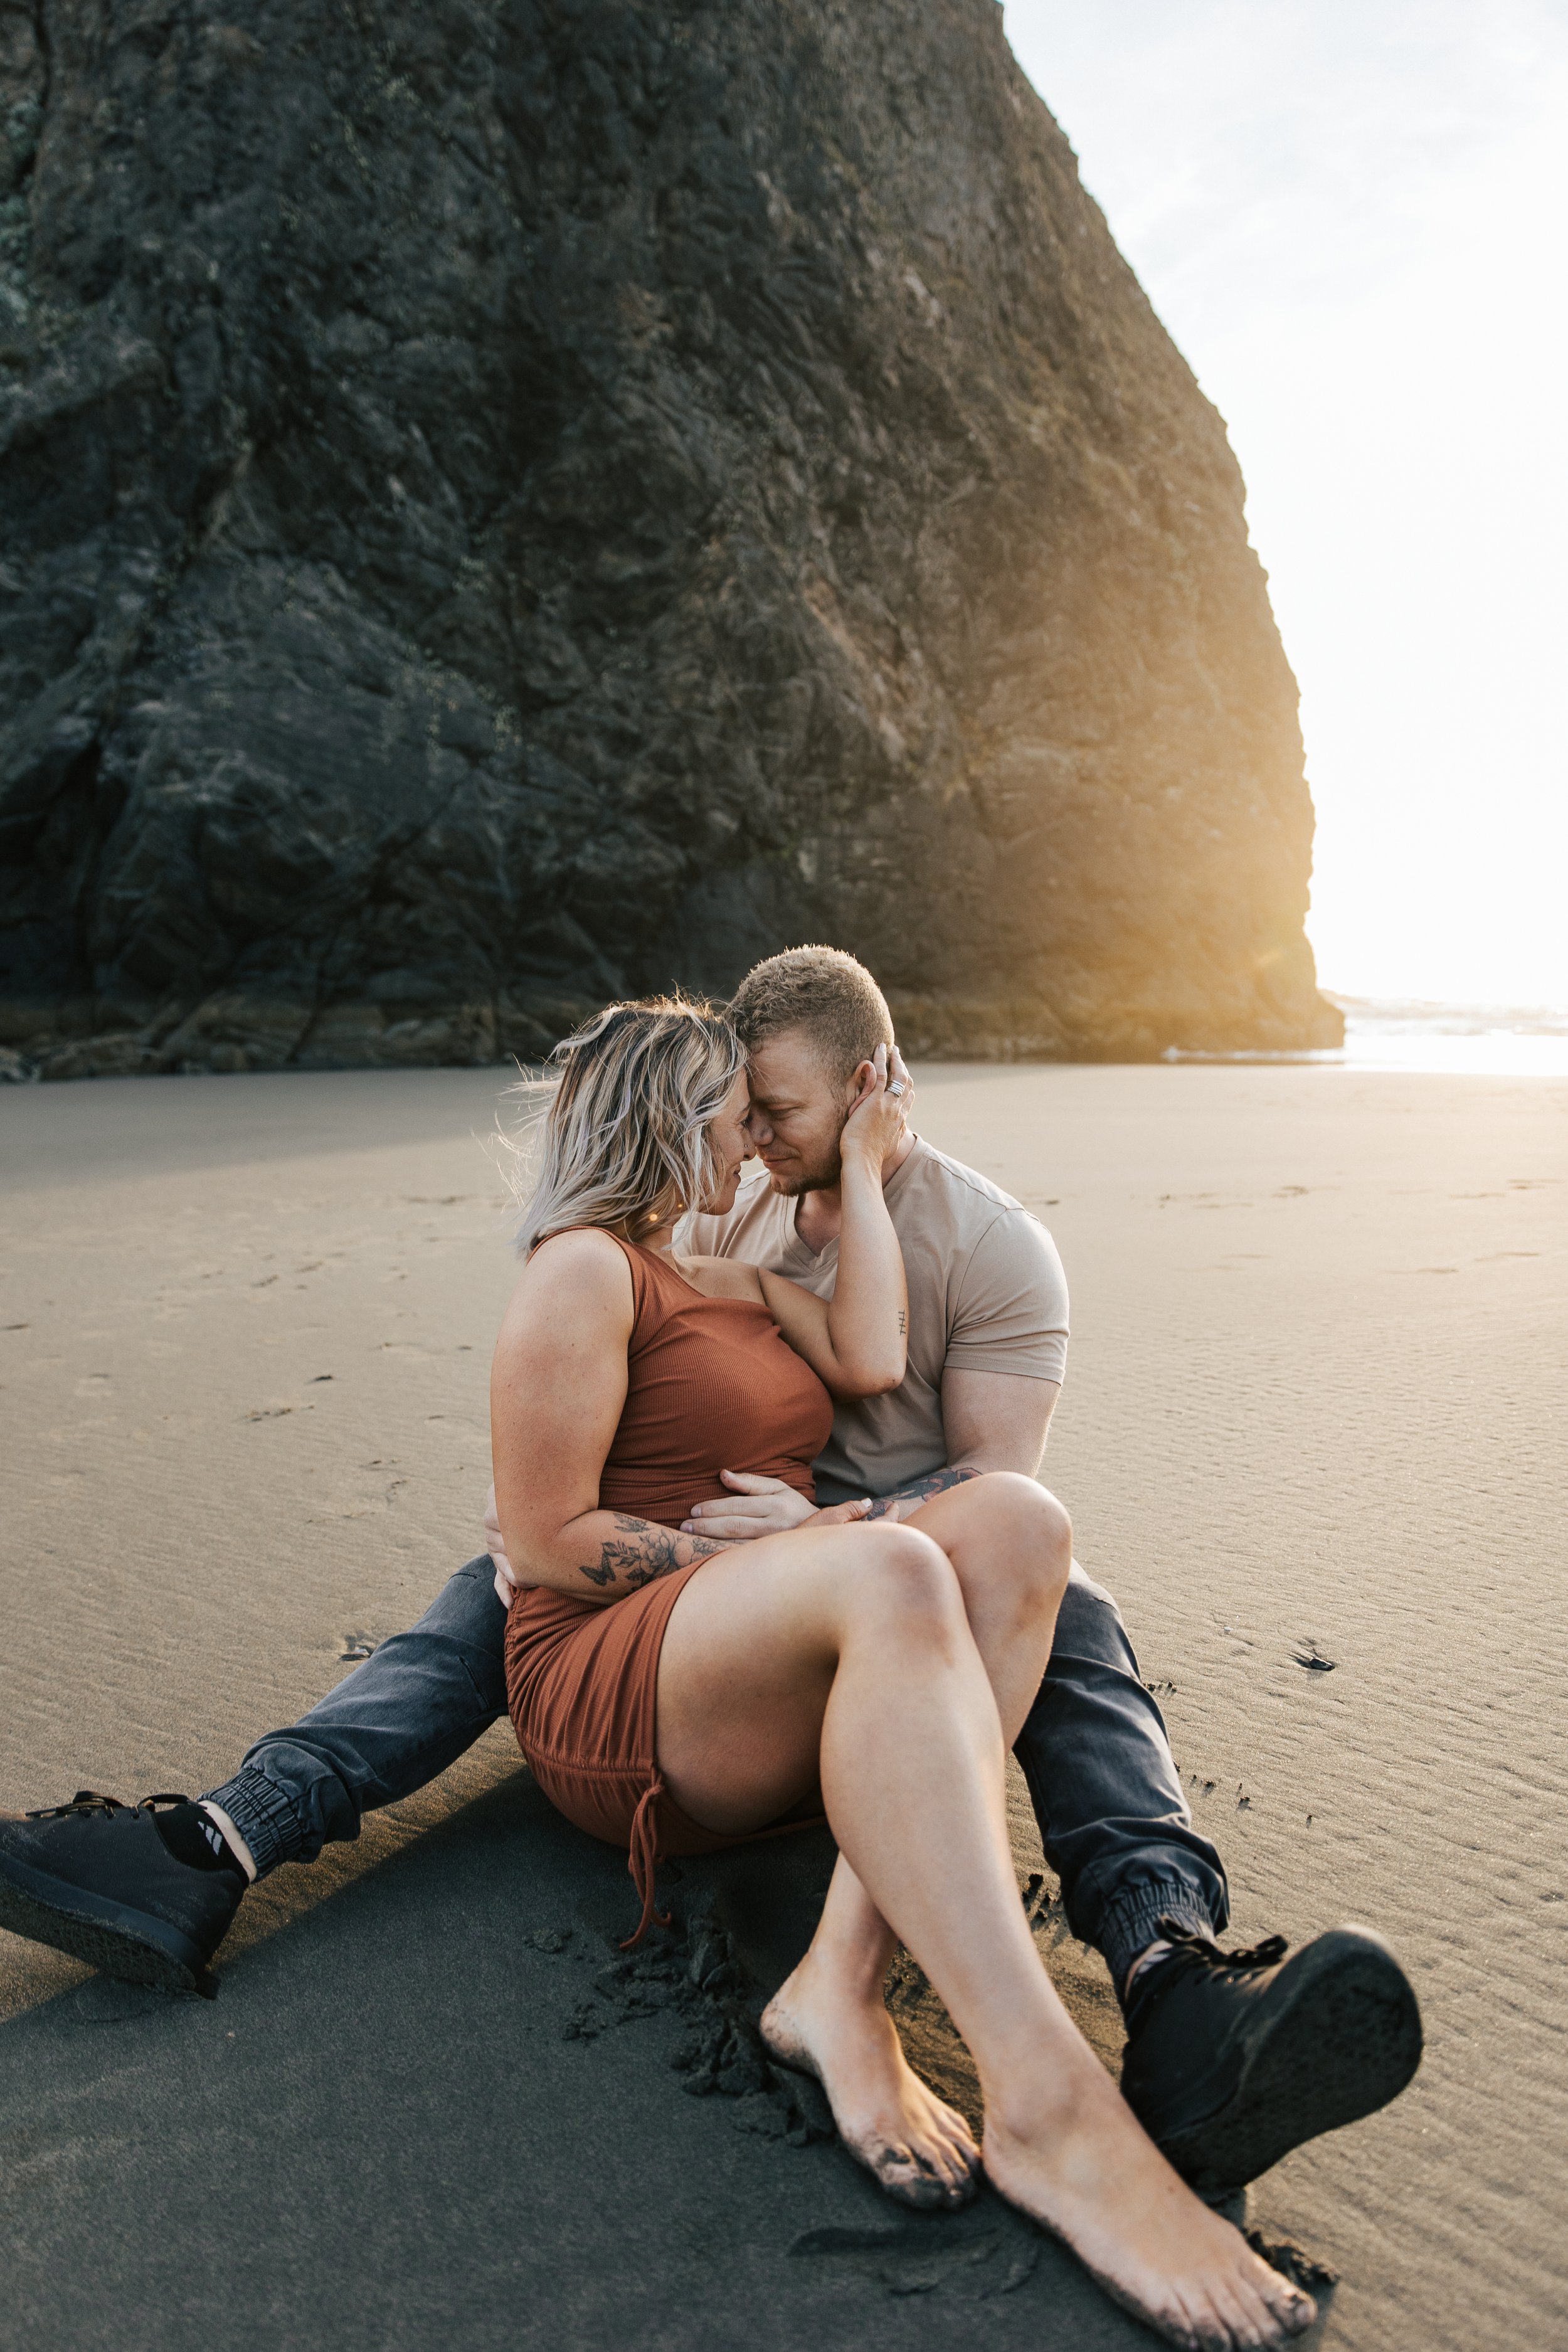  Brookings, Oregon engagement session. Couple cuddles on the beach for a summer couples session on their anniversary. Husband and wife run around the beach with seastacks and rocks on the beach around them, barefoot in the sand.  